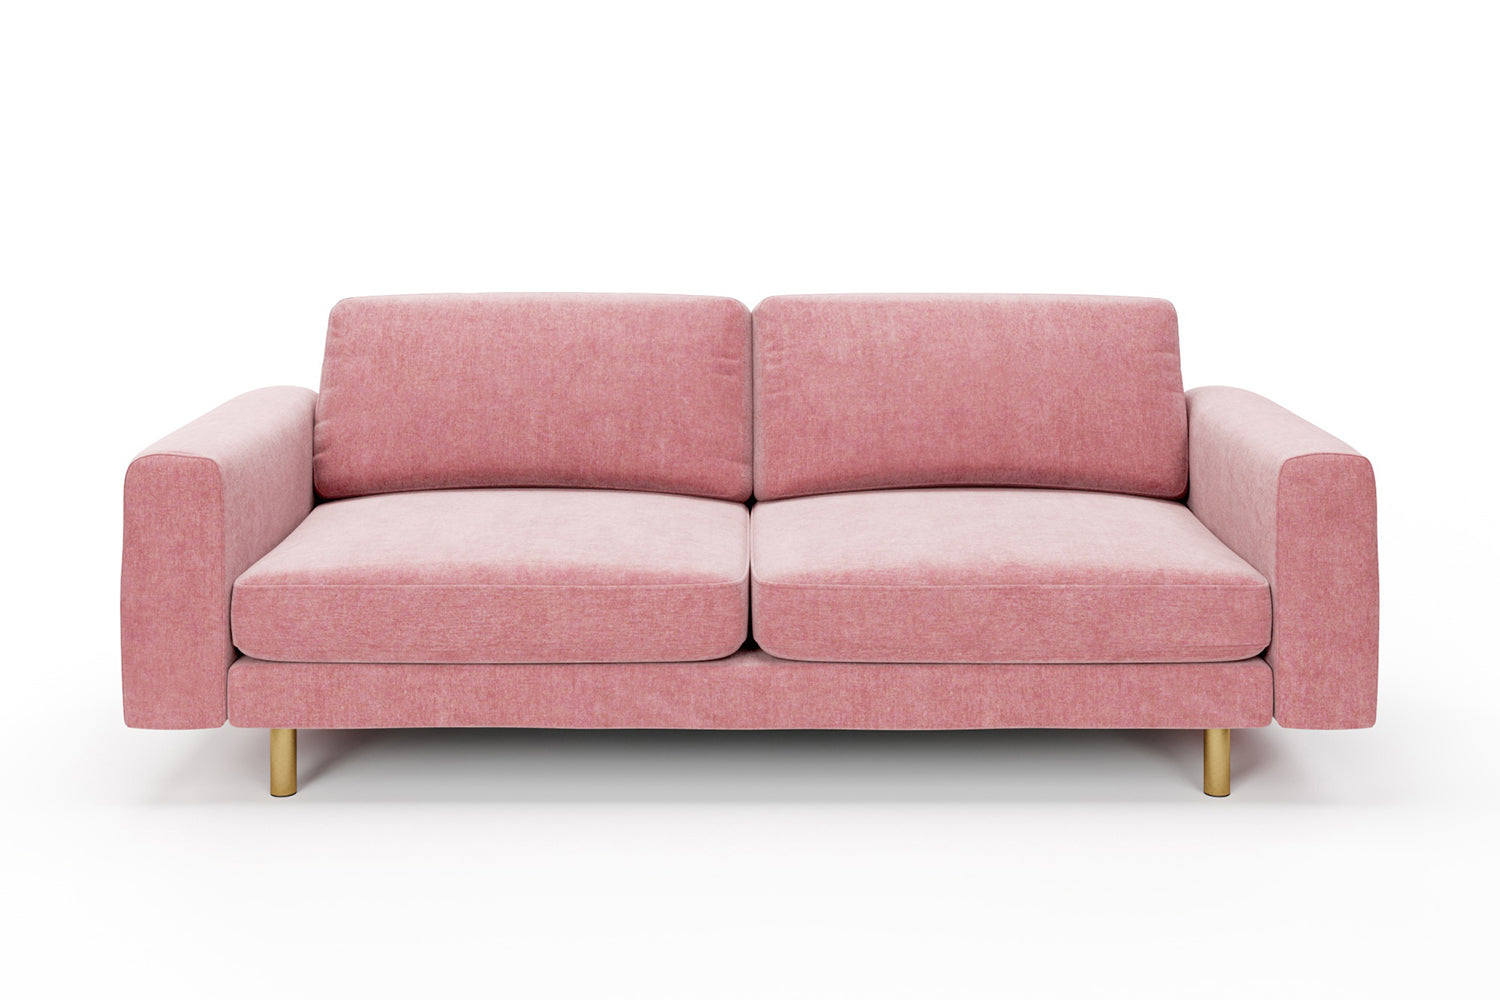 SNUG | The Big Chill 3 Seater Sofa in Blush Coral variant_40621896106032